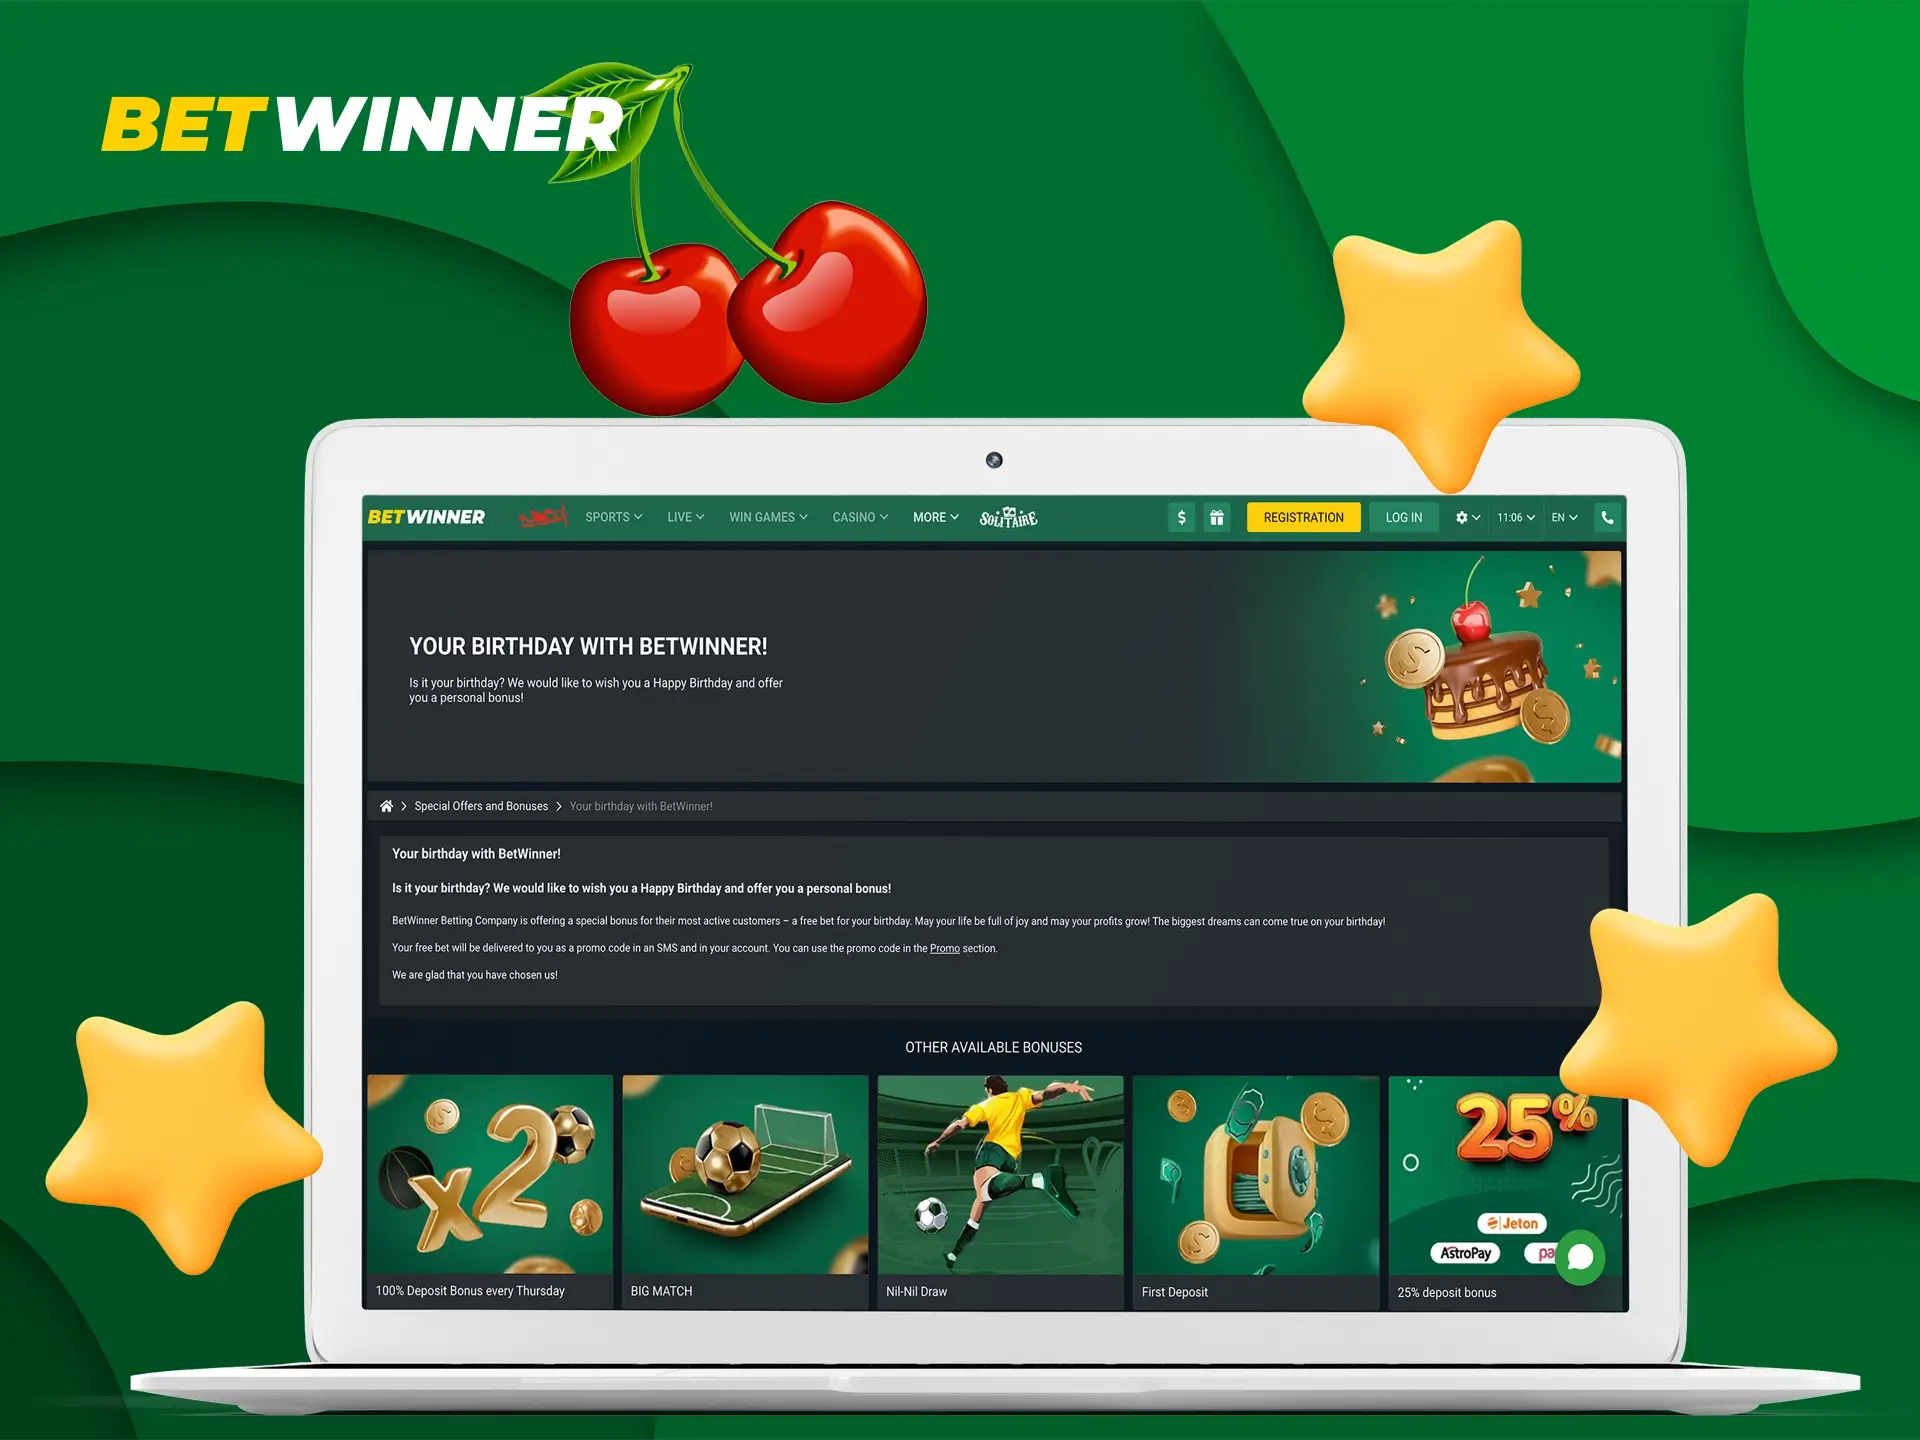 Betwinner's wide range of bonuses will never let you get bored.